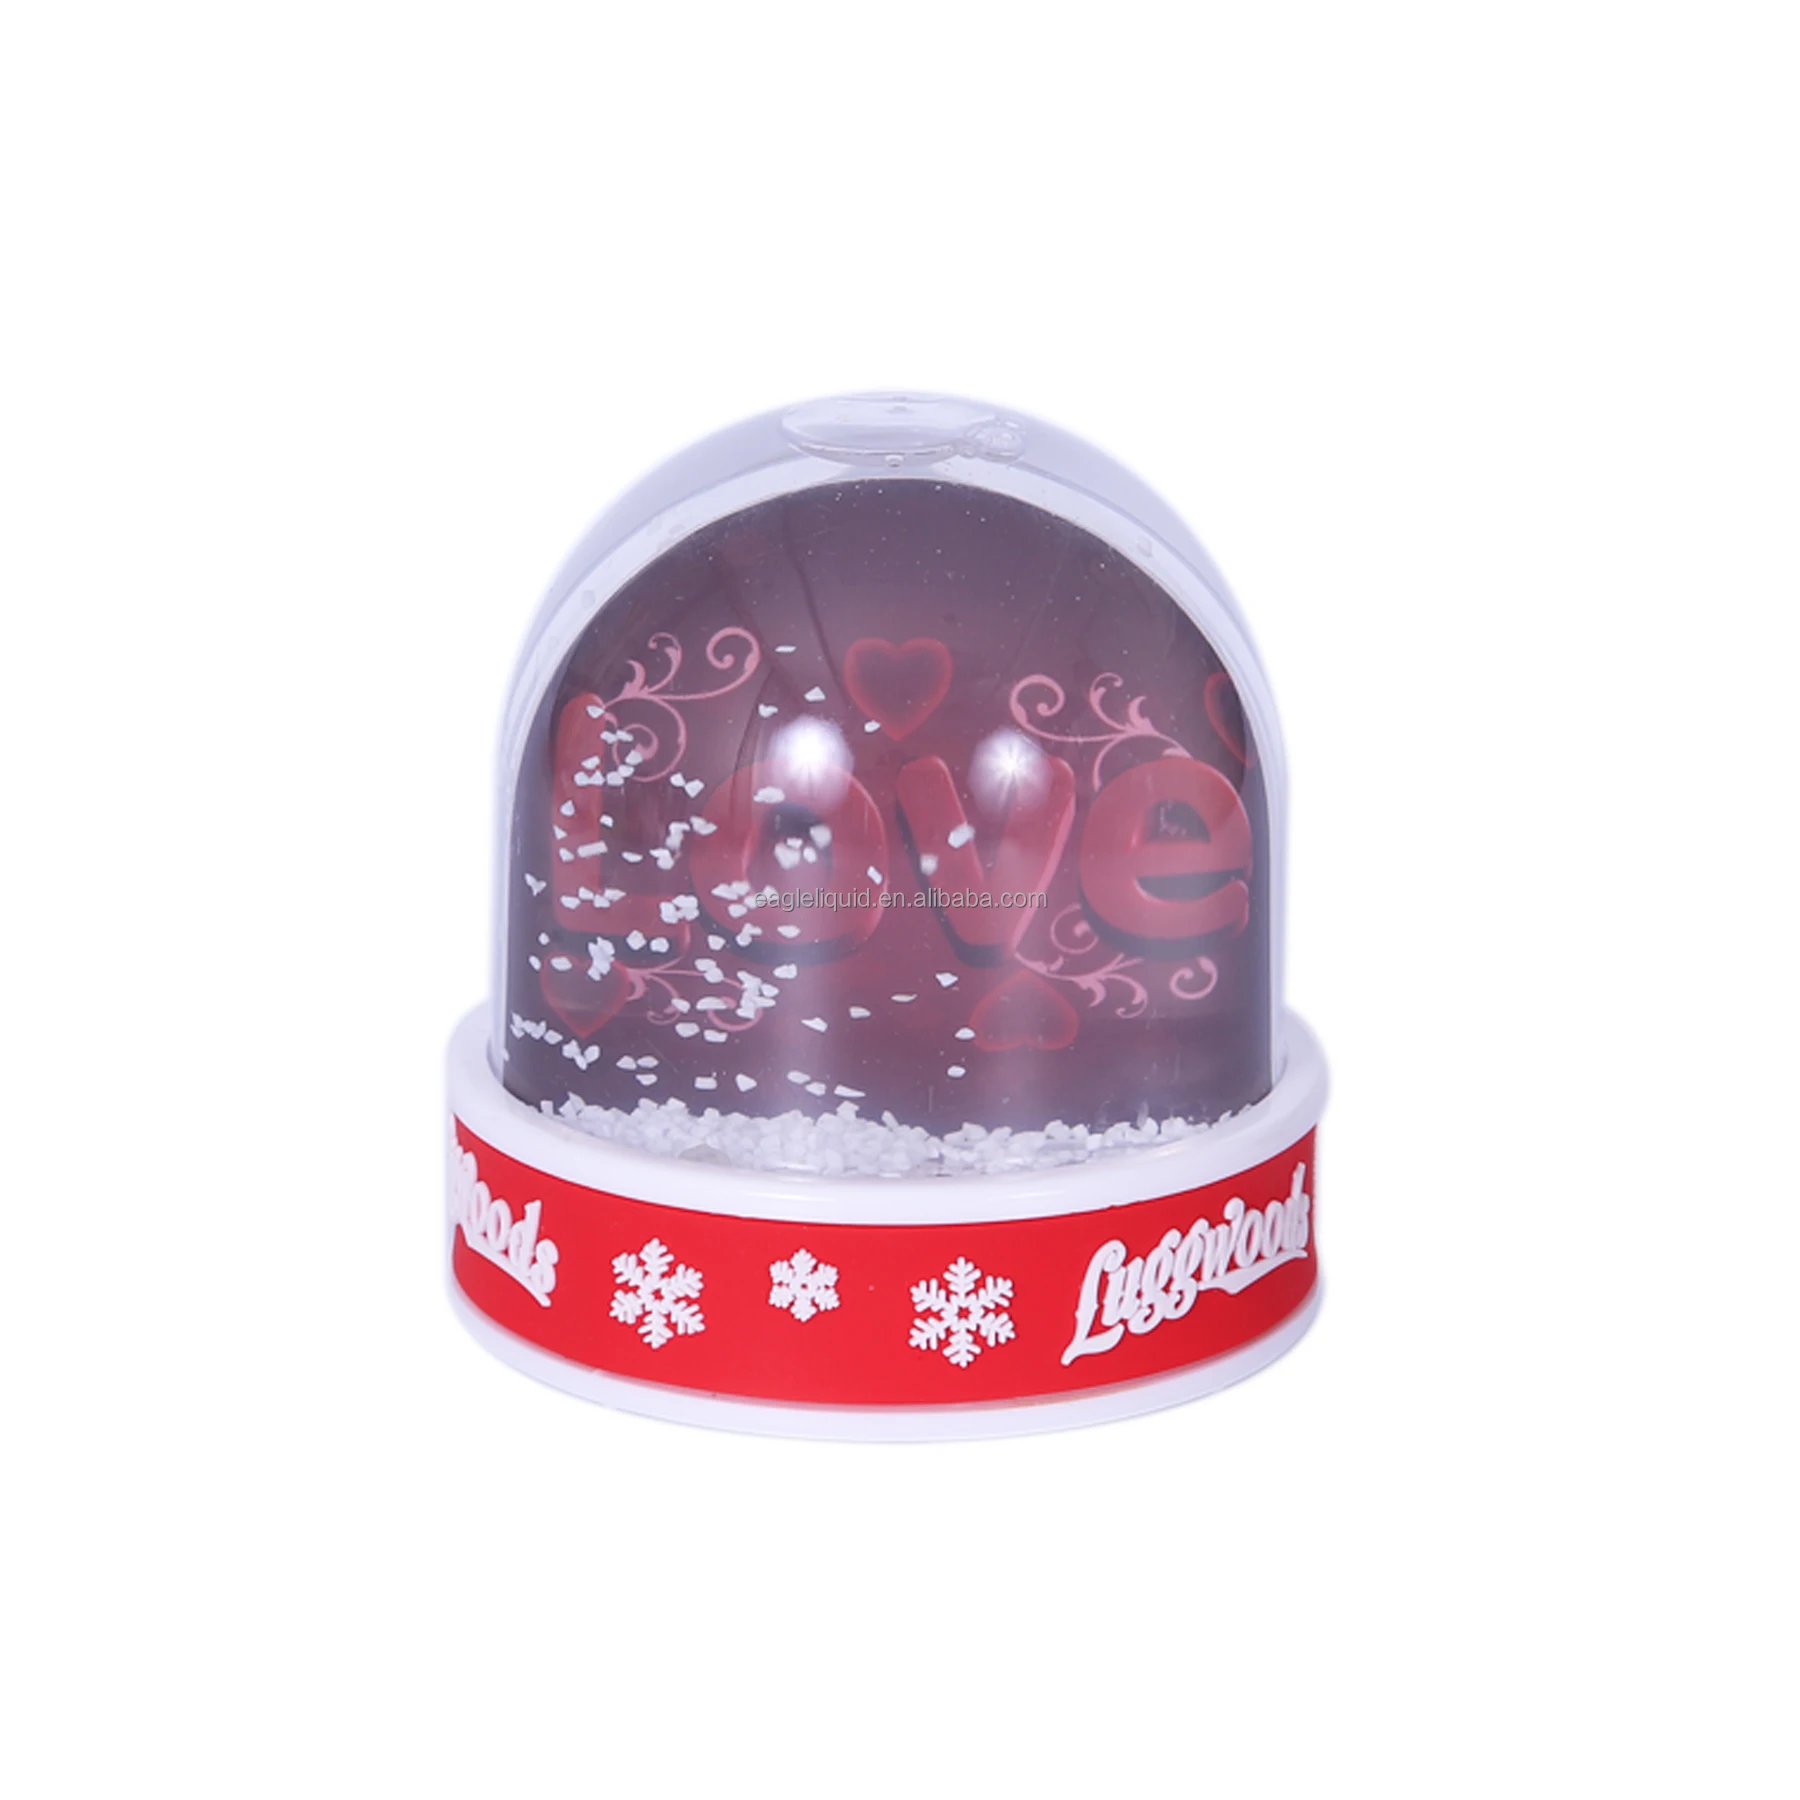 

Factory Wholesale Cheap Custom Souvenirs Plastic Photo Frame Snow Globe With Picture Insert Promotion Water Dome DIY Snow Globes